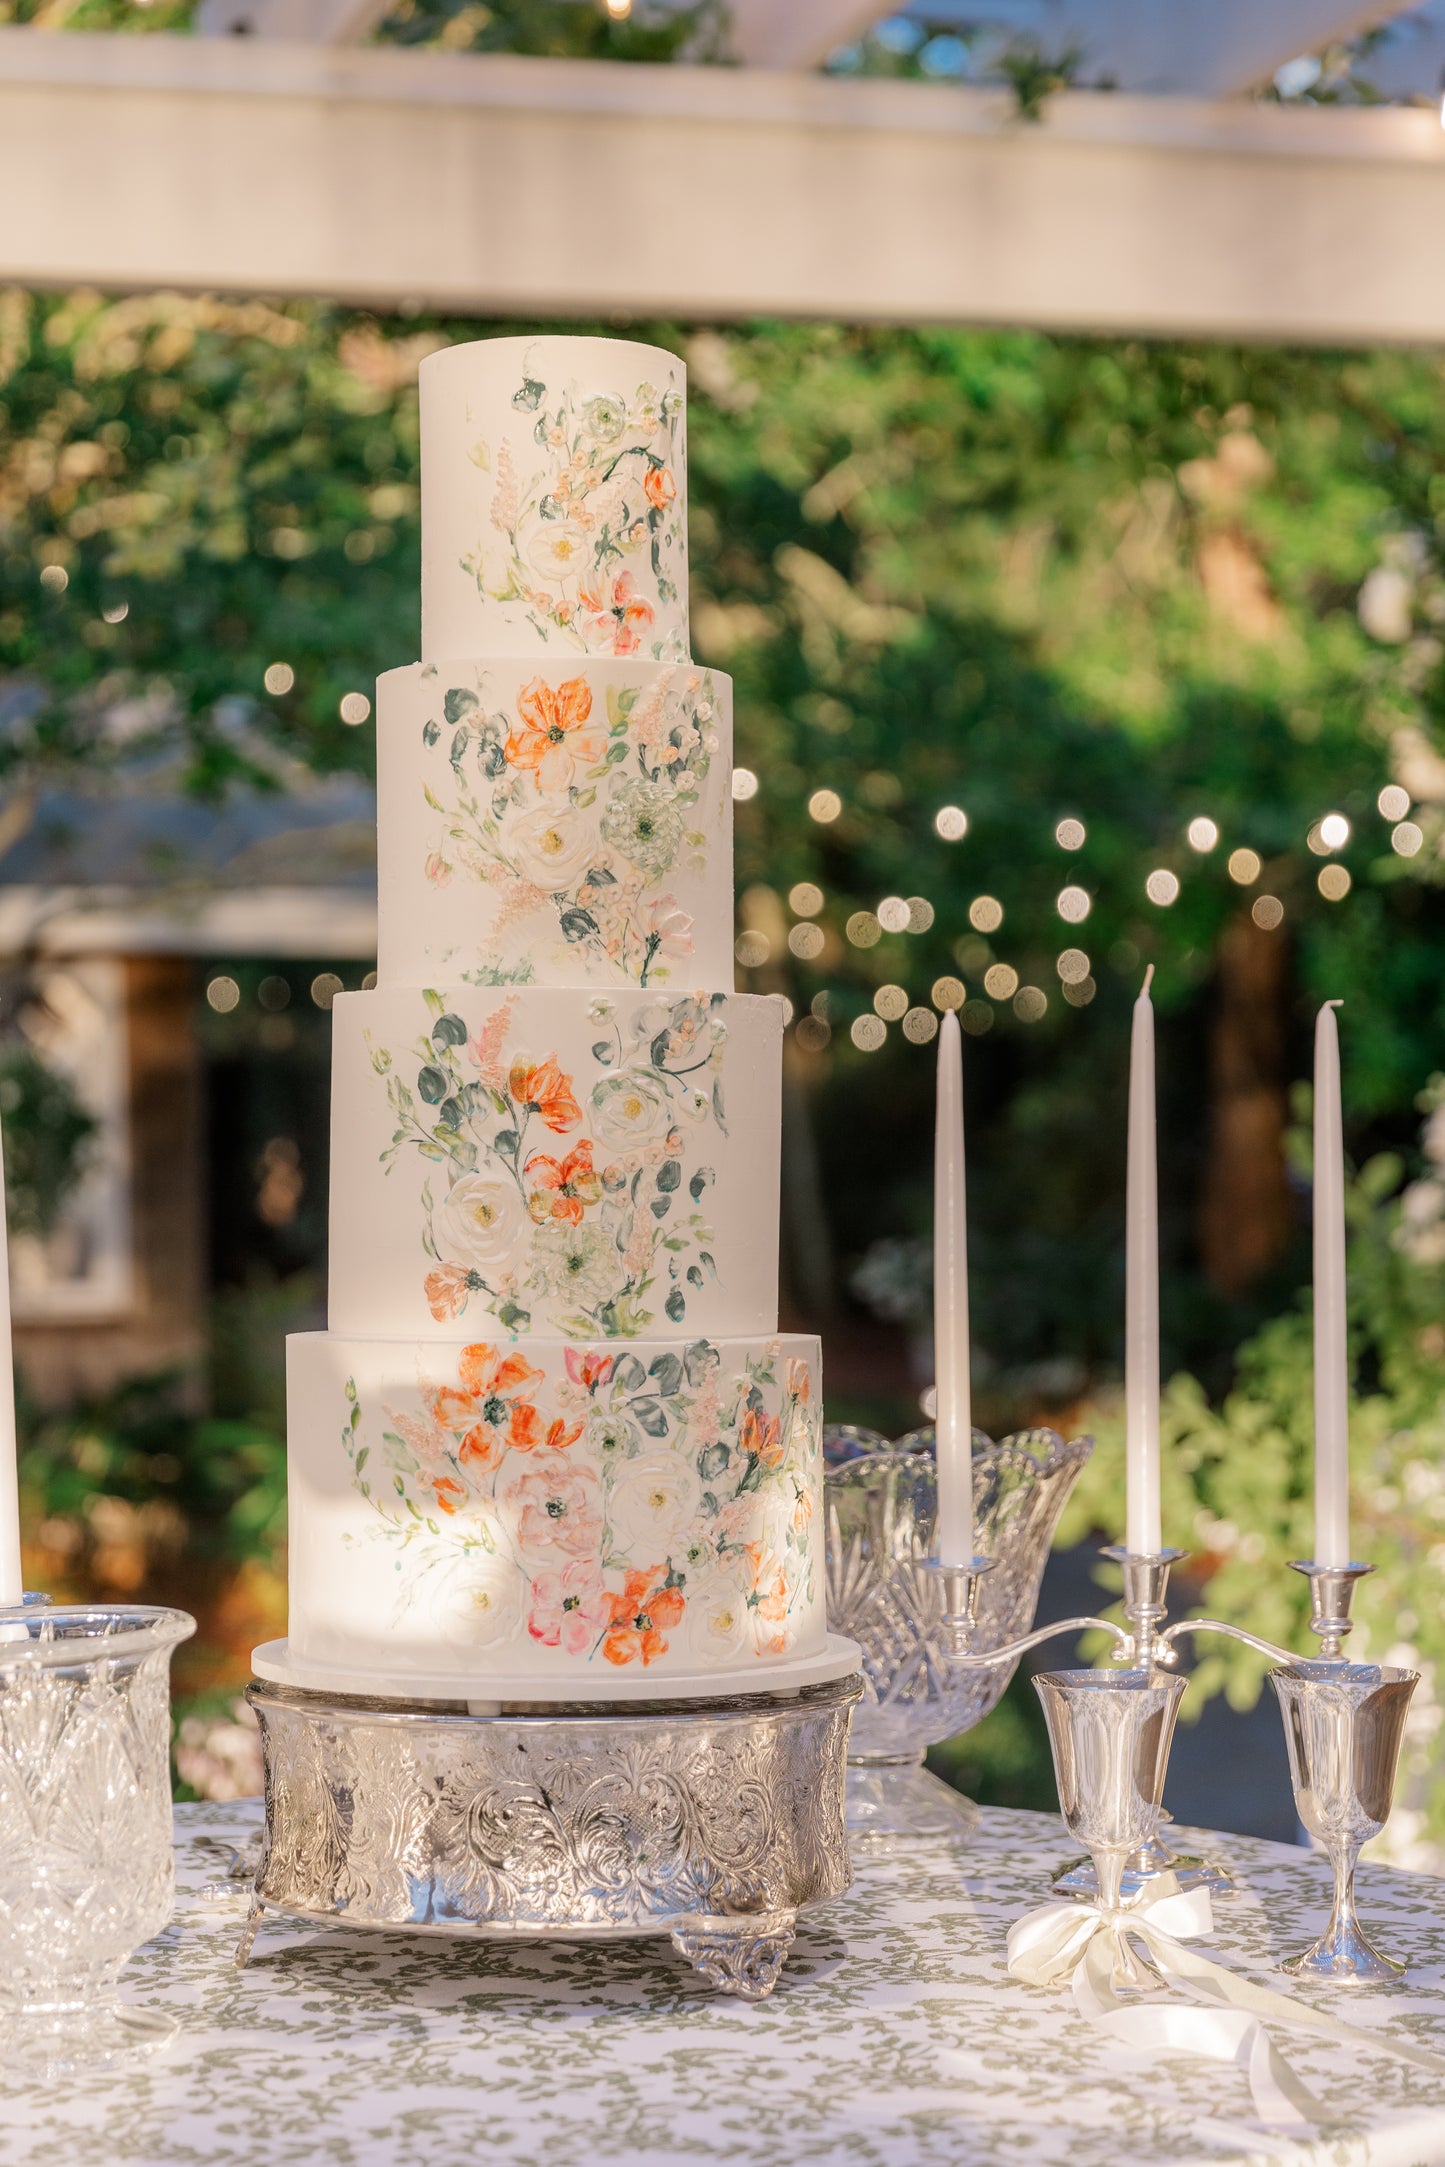 Painted Buttercream Wedding Cakes